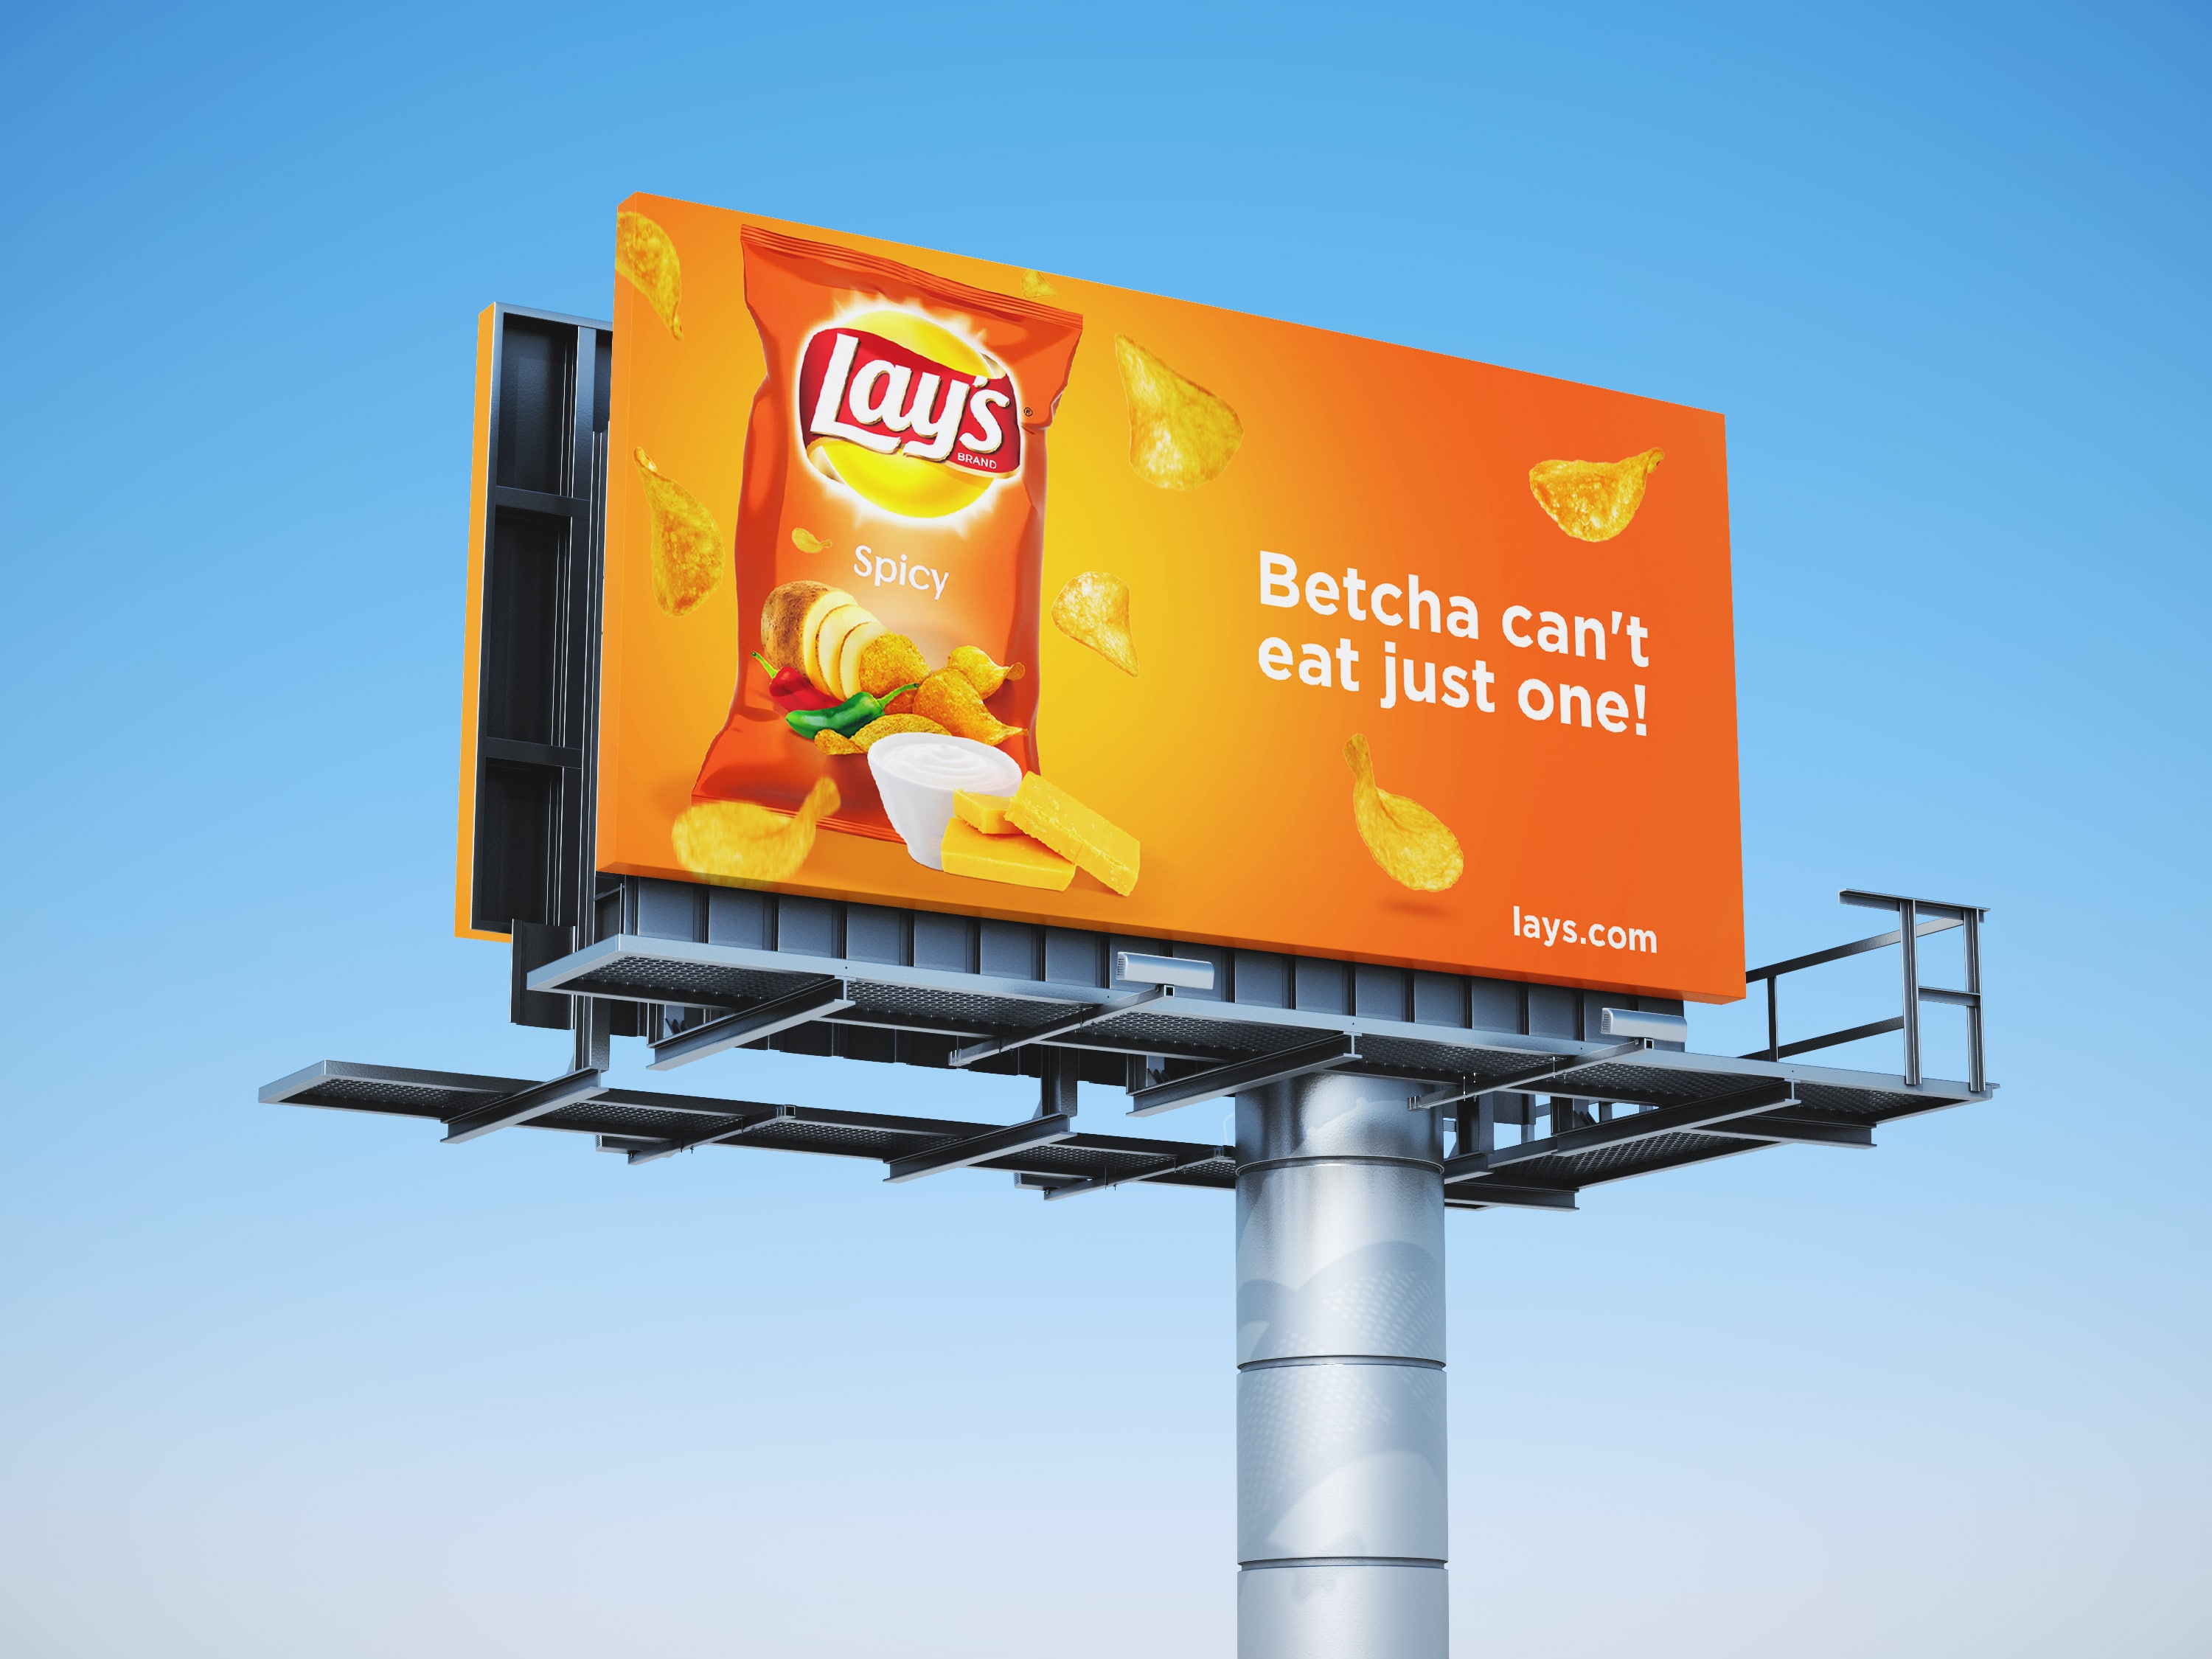 “Betcha Can't Eat Just One” (Lay’s)